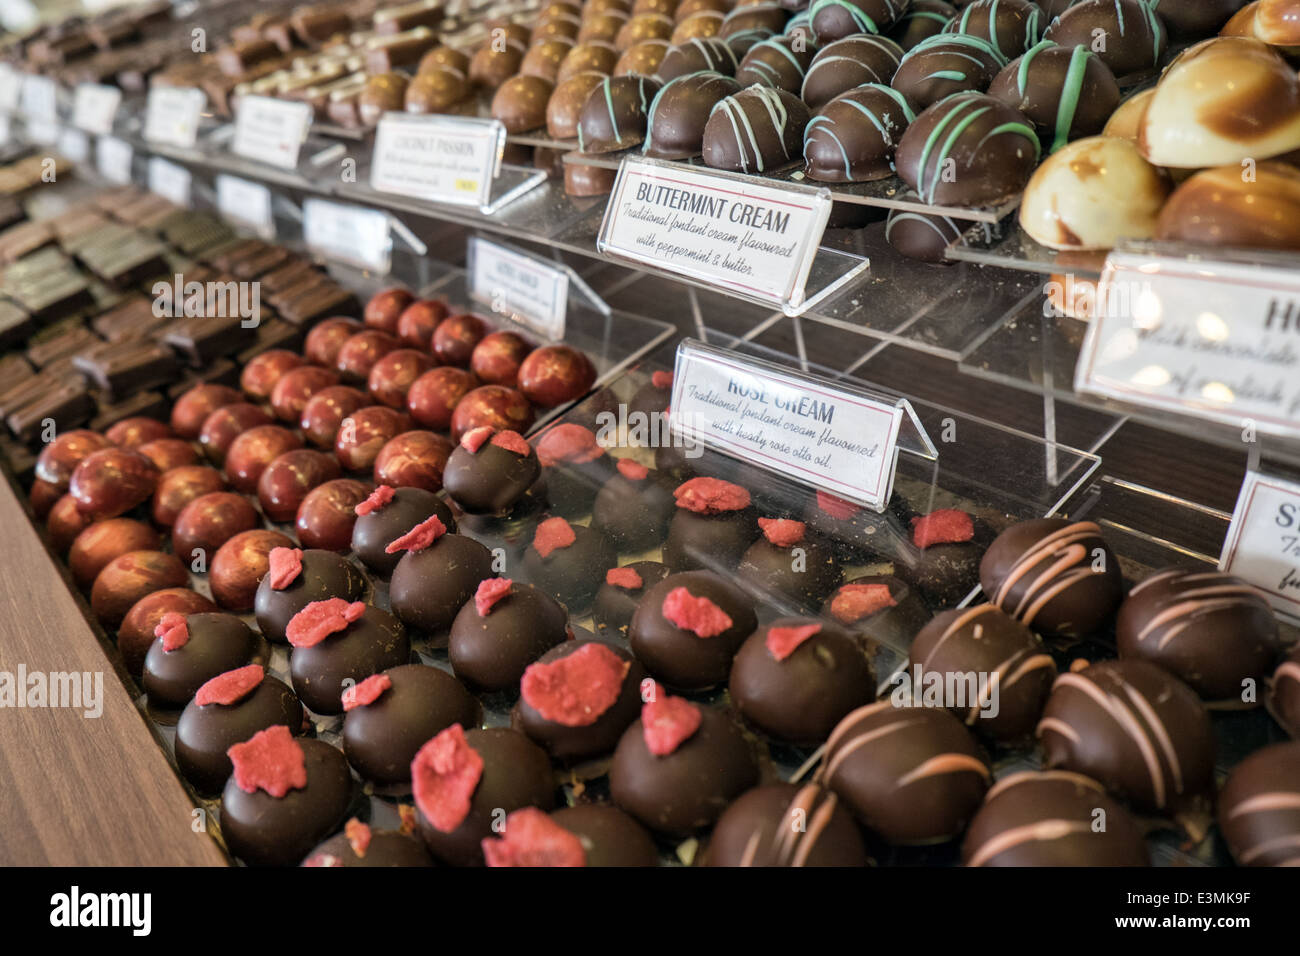 An assortment of gourmet chocolates, labeled & in rows on trays in a display at an artisan chocolatier's store Stock Photo